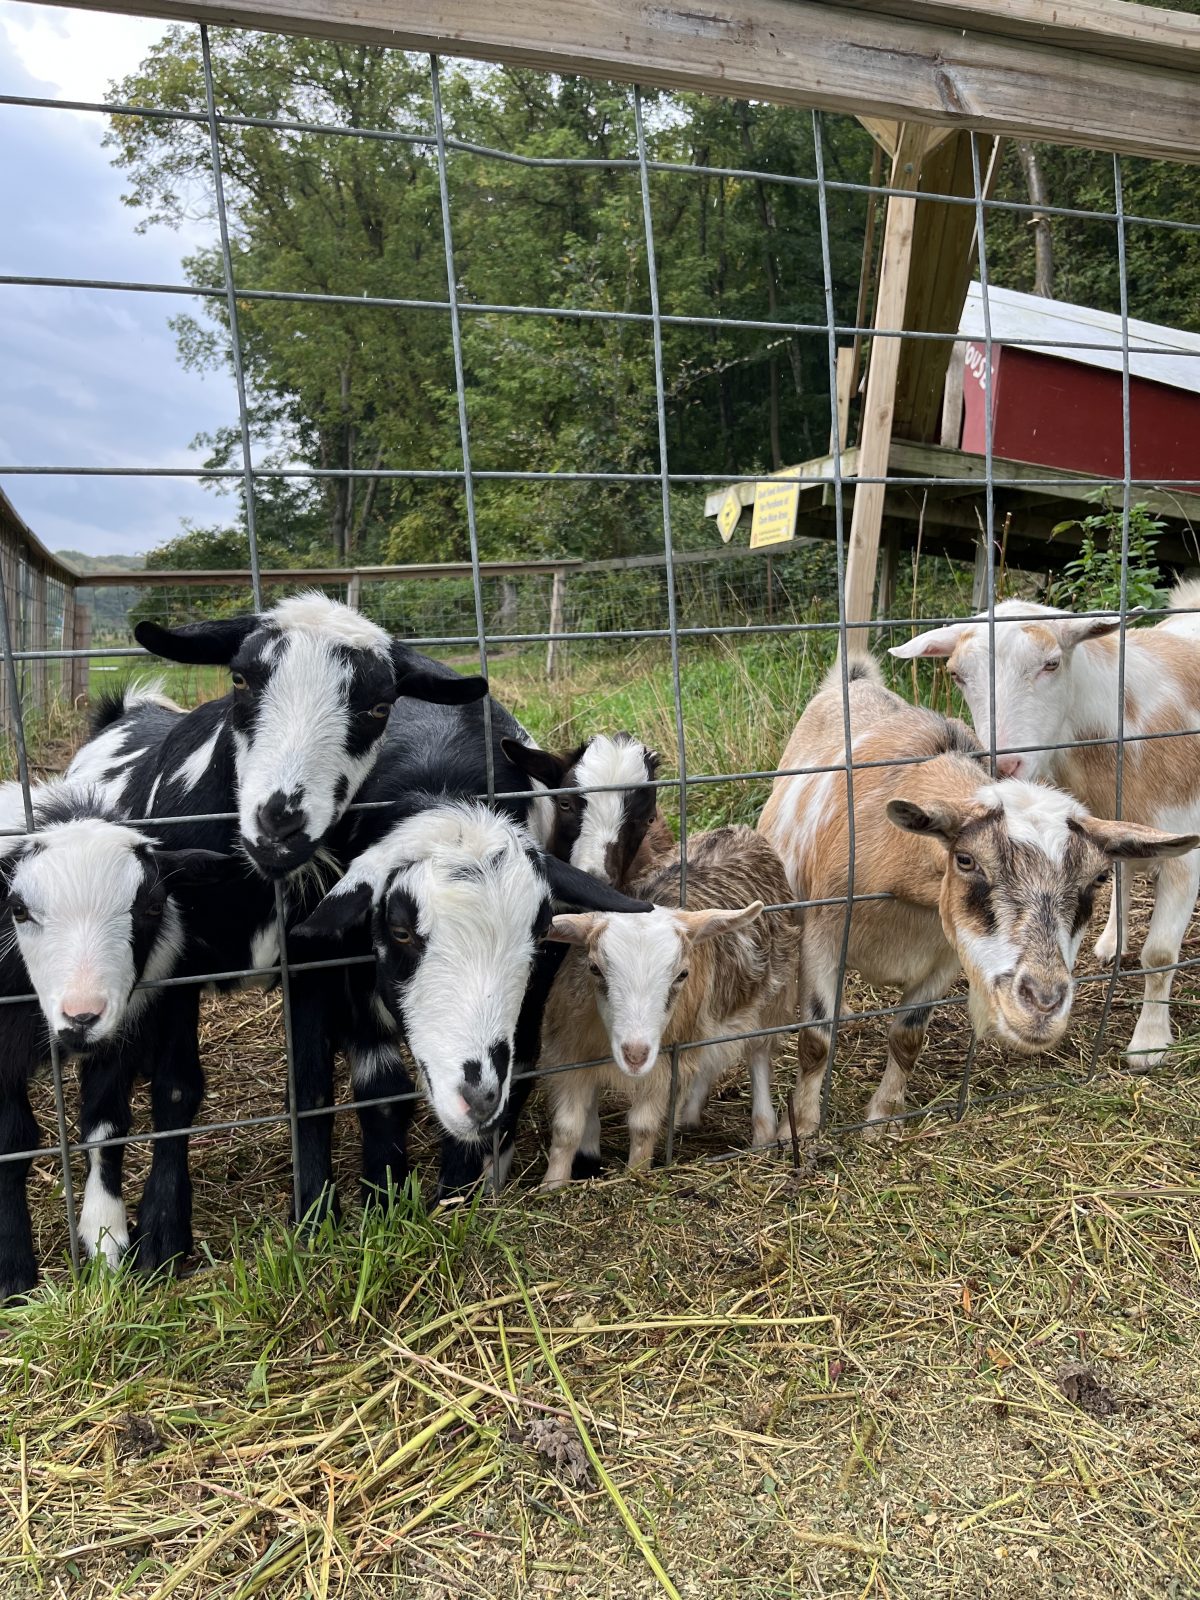 A group of goats standing behind a fence.